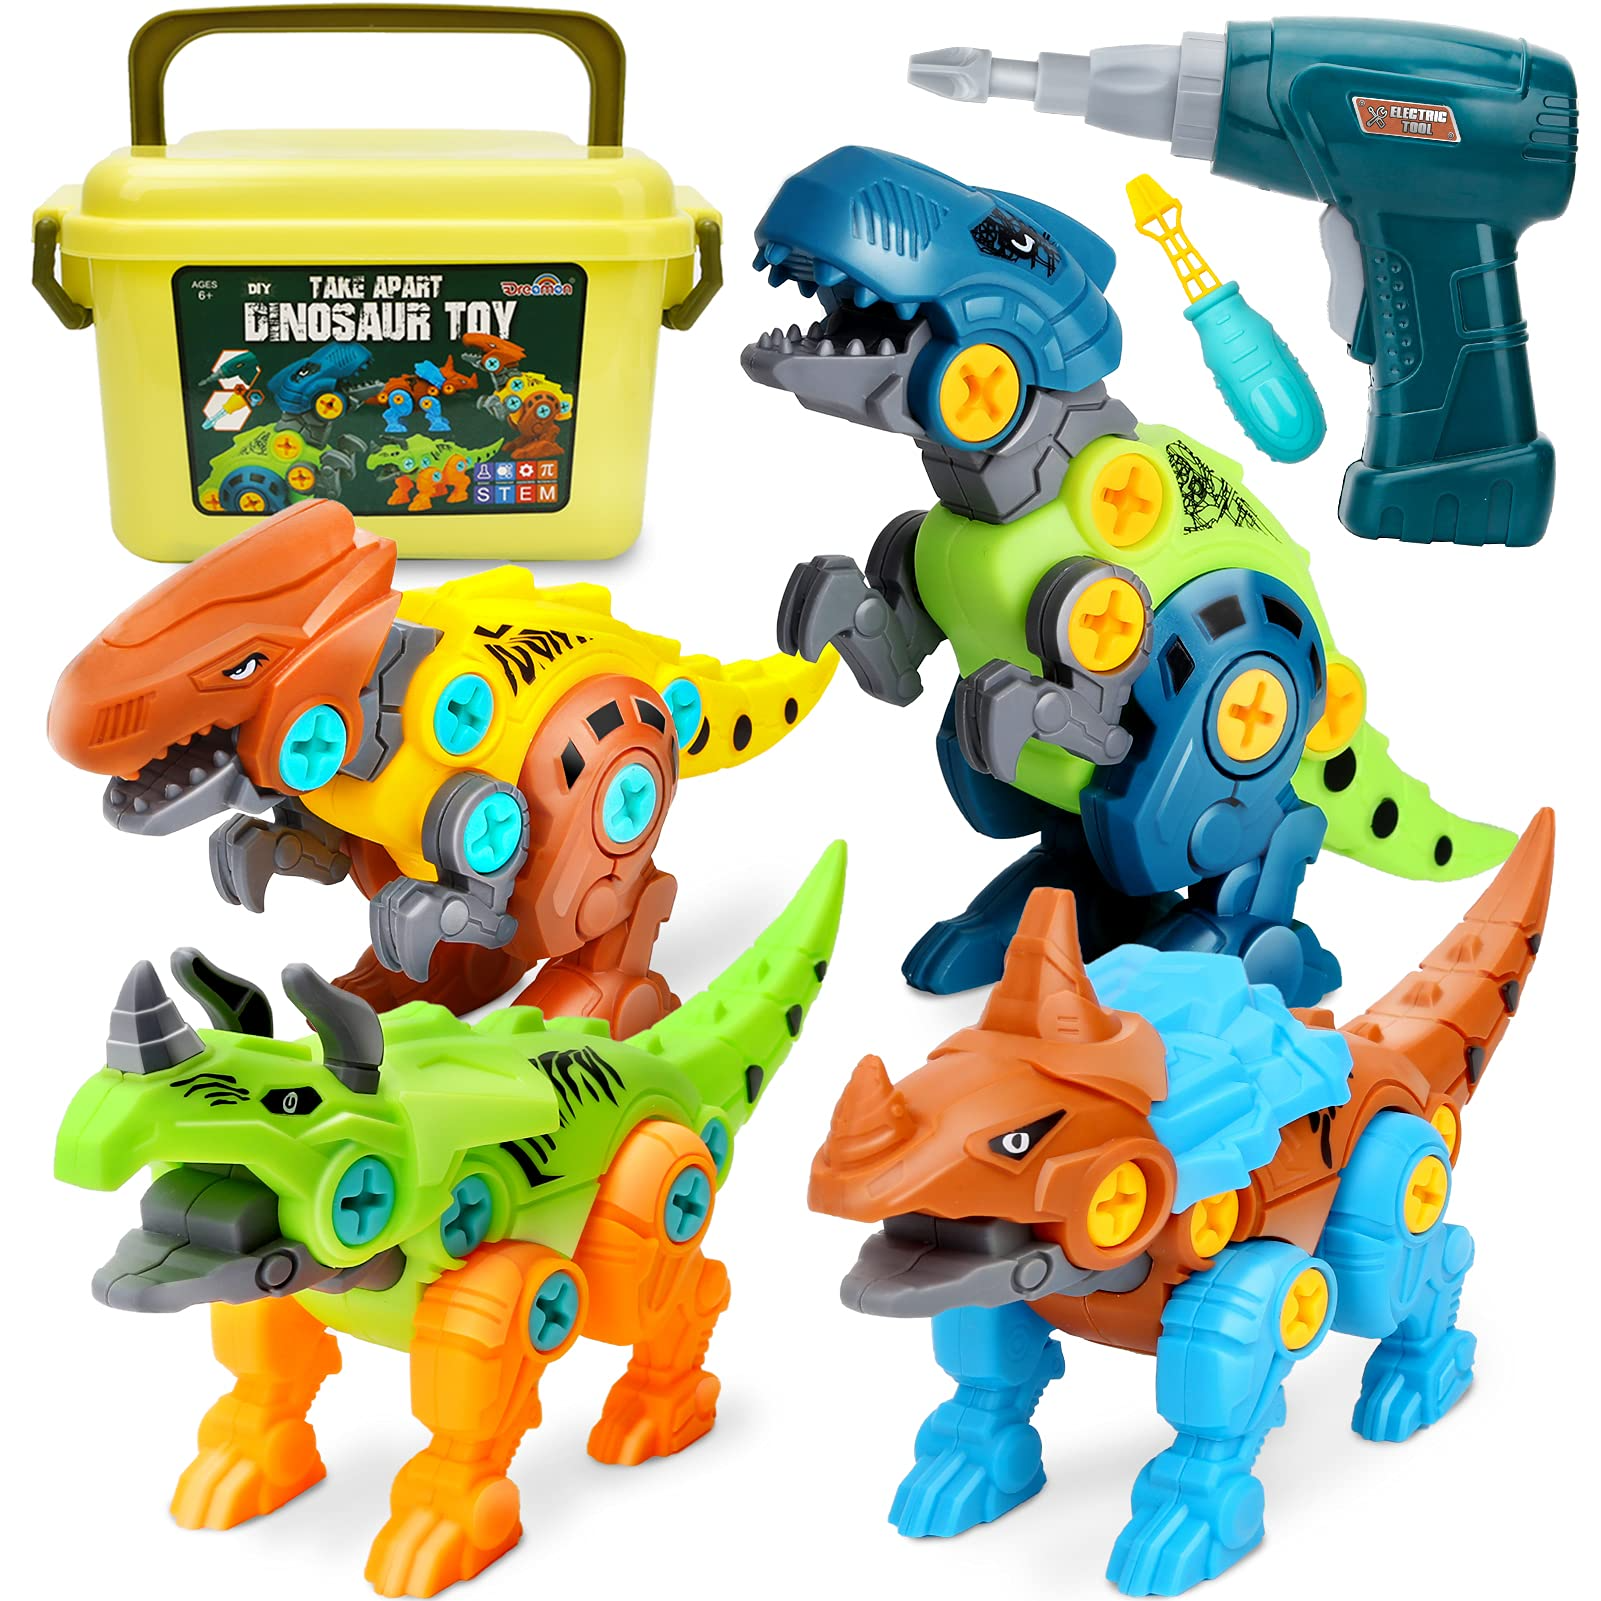 JFJMKV Take Apart Dinosaur Toys for Kids Building Educational Toy Set for Boys and Girls with Electric Drill Construction Engineering Play Kit STEM Learning Toys for Kids Age 3-8 